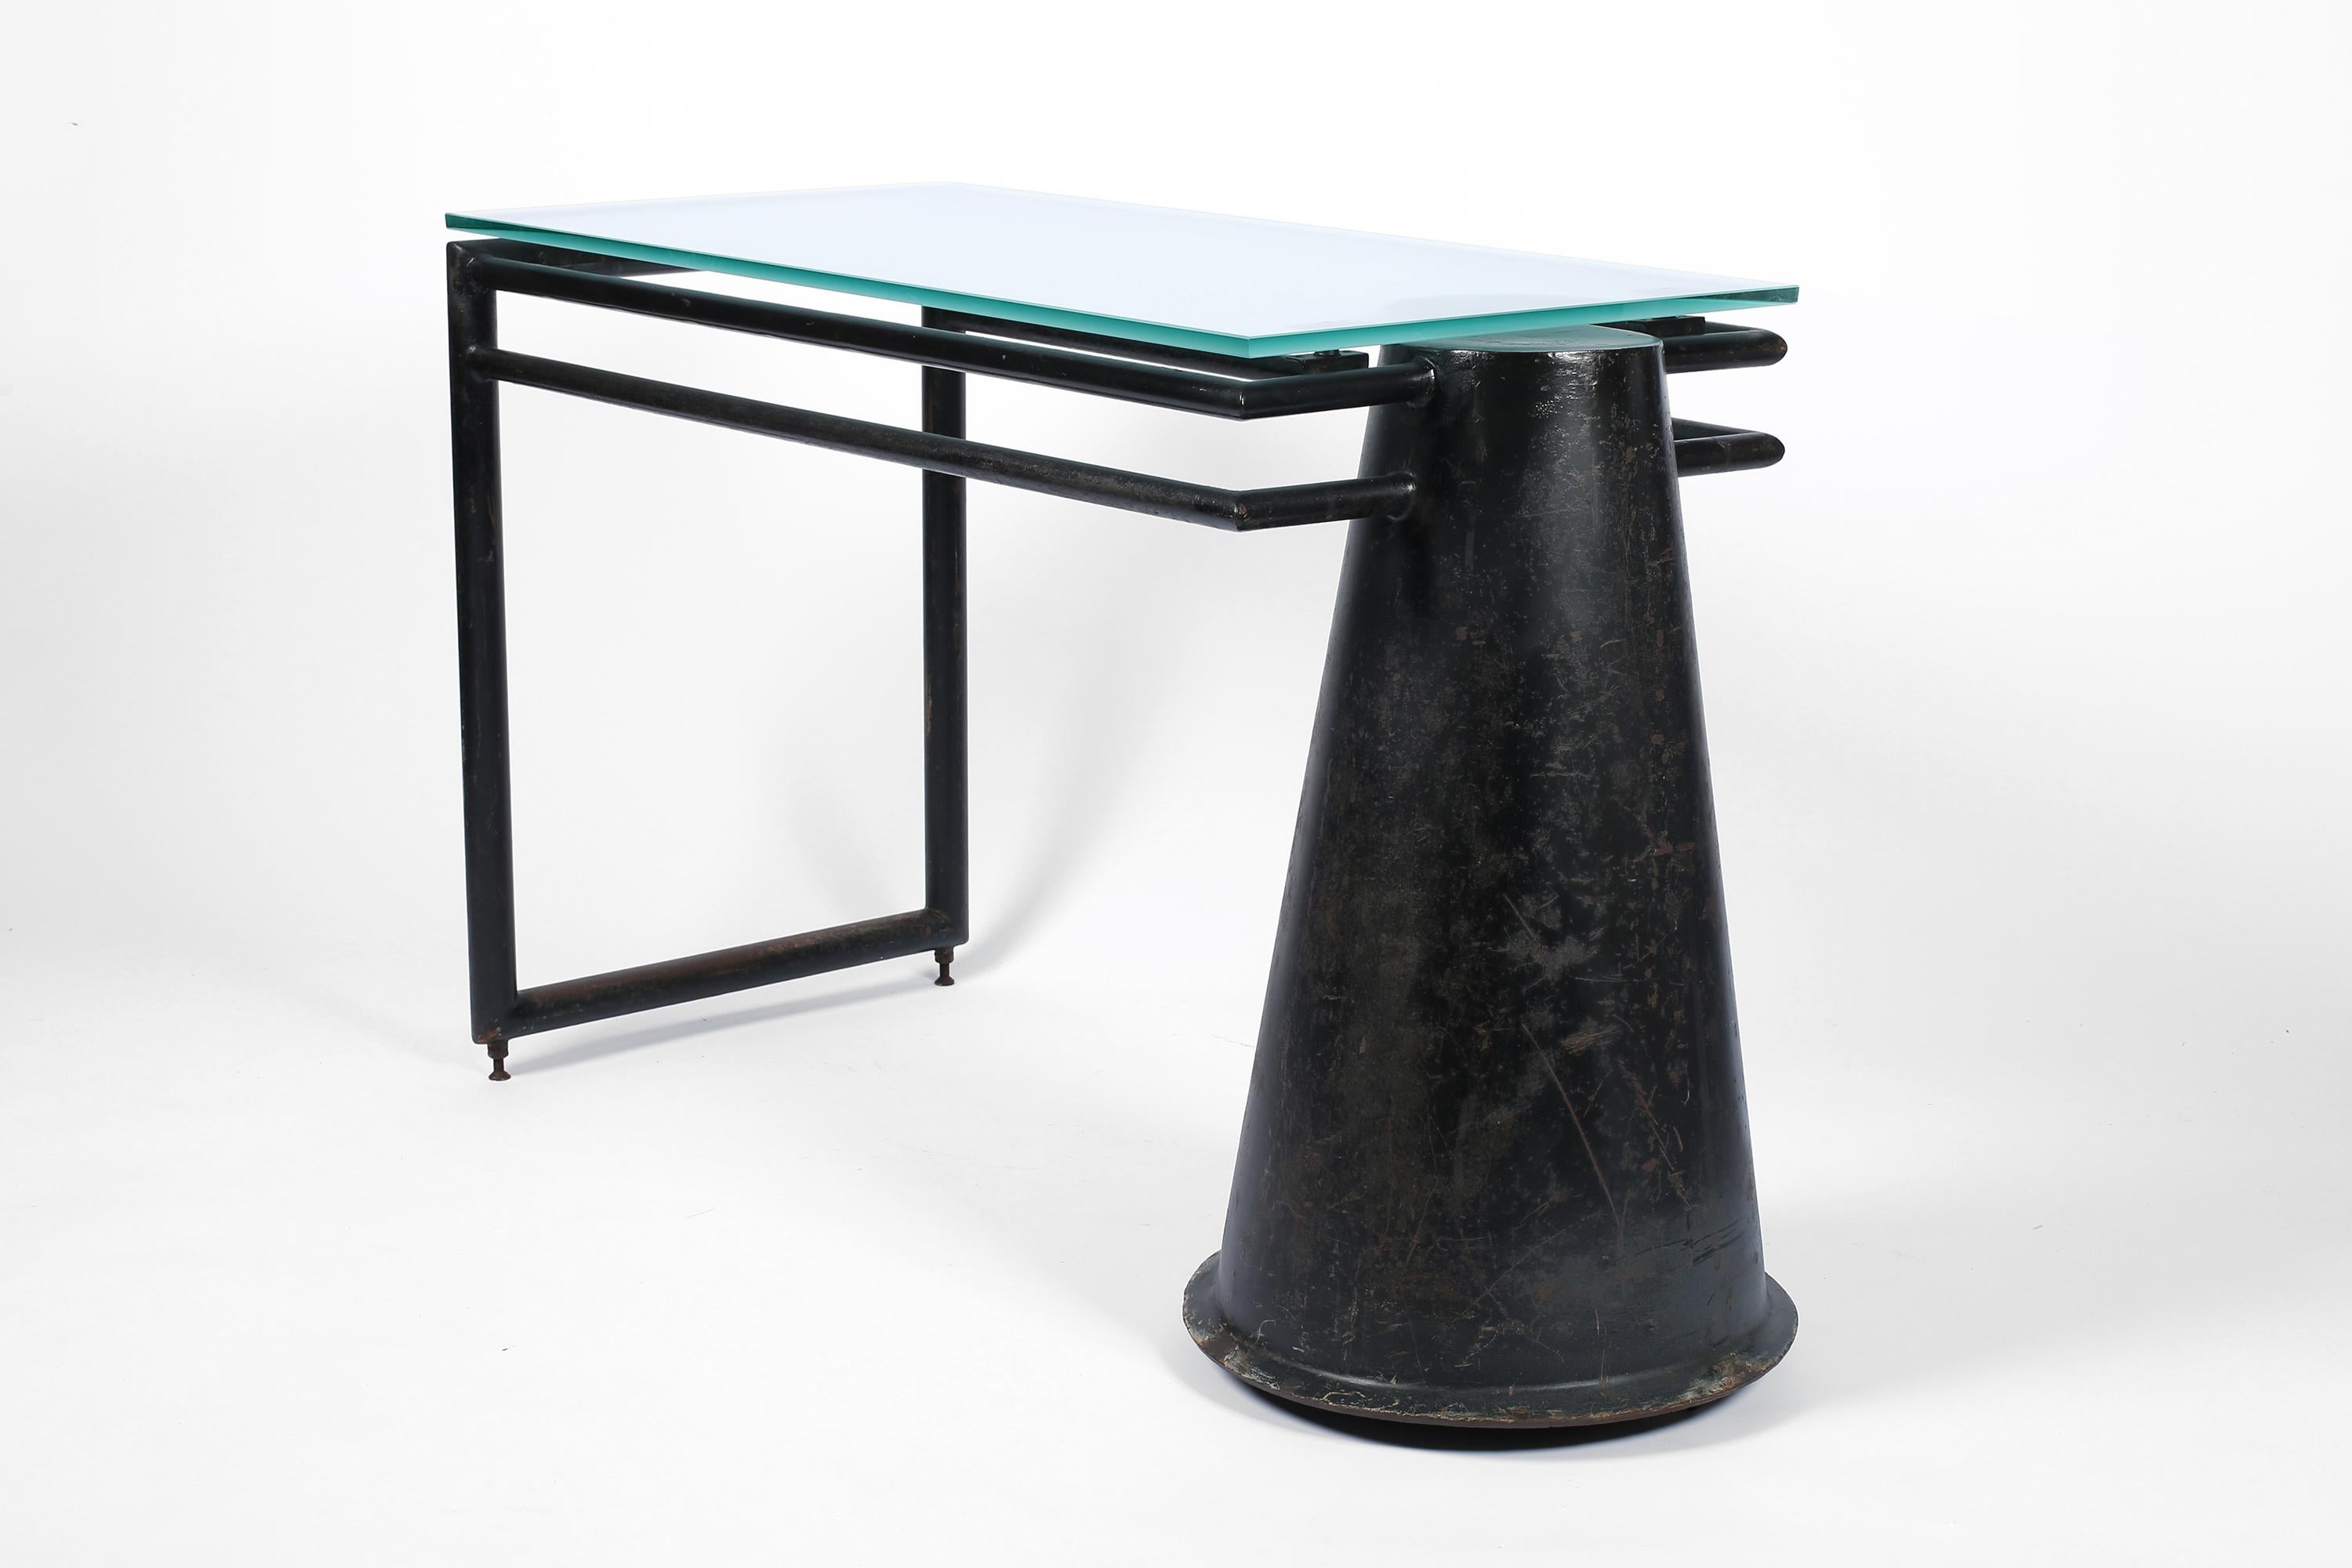 Frosted Modernist Steel and Glass Desk, French Early-Mid 20th Century For Sale